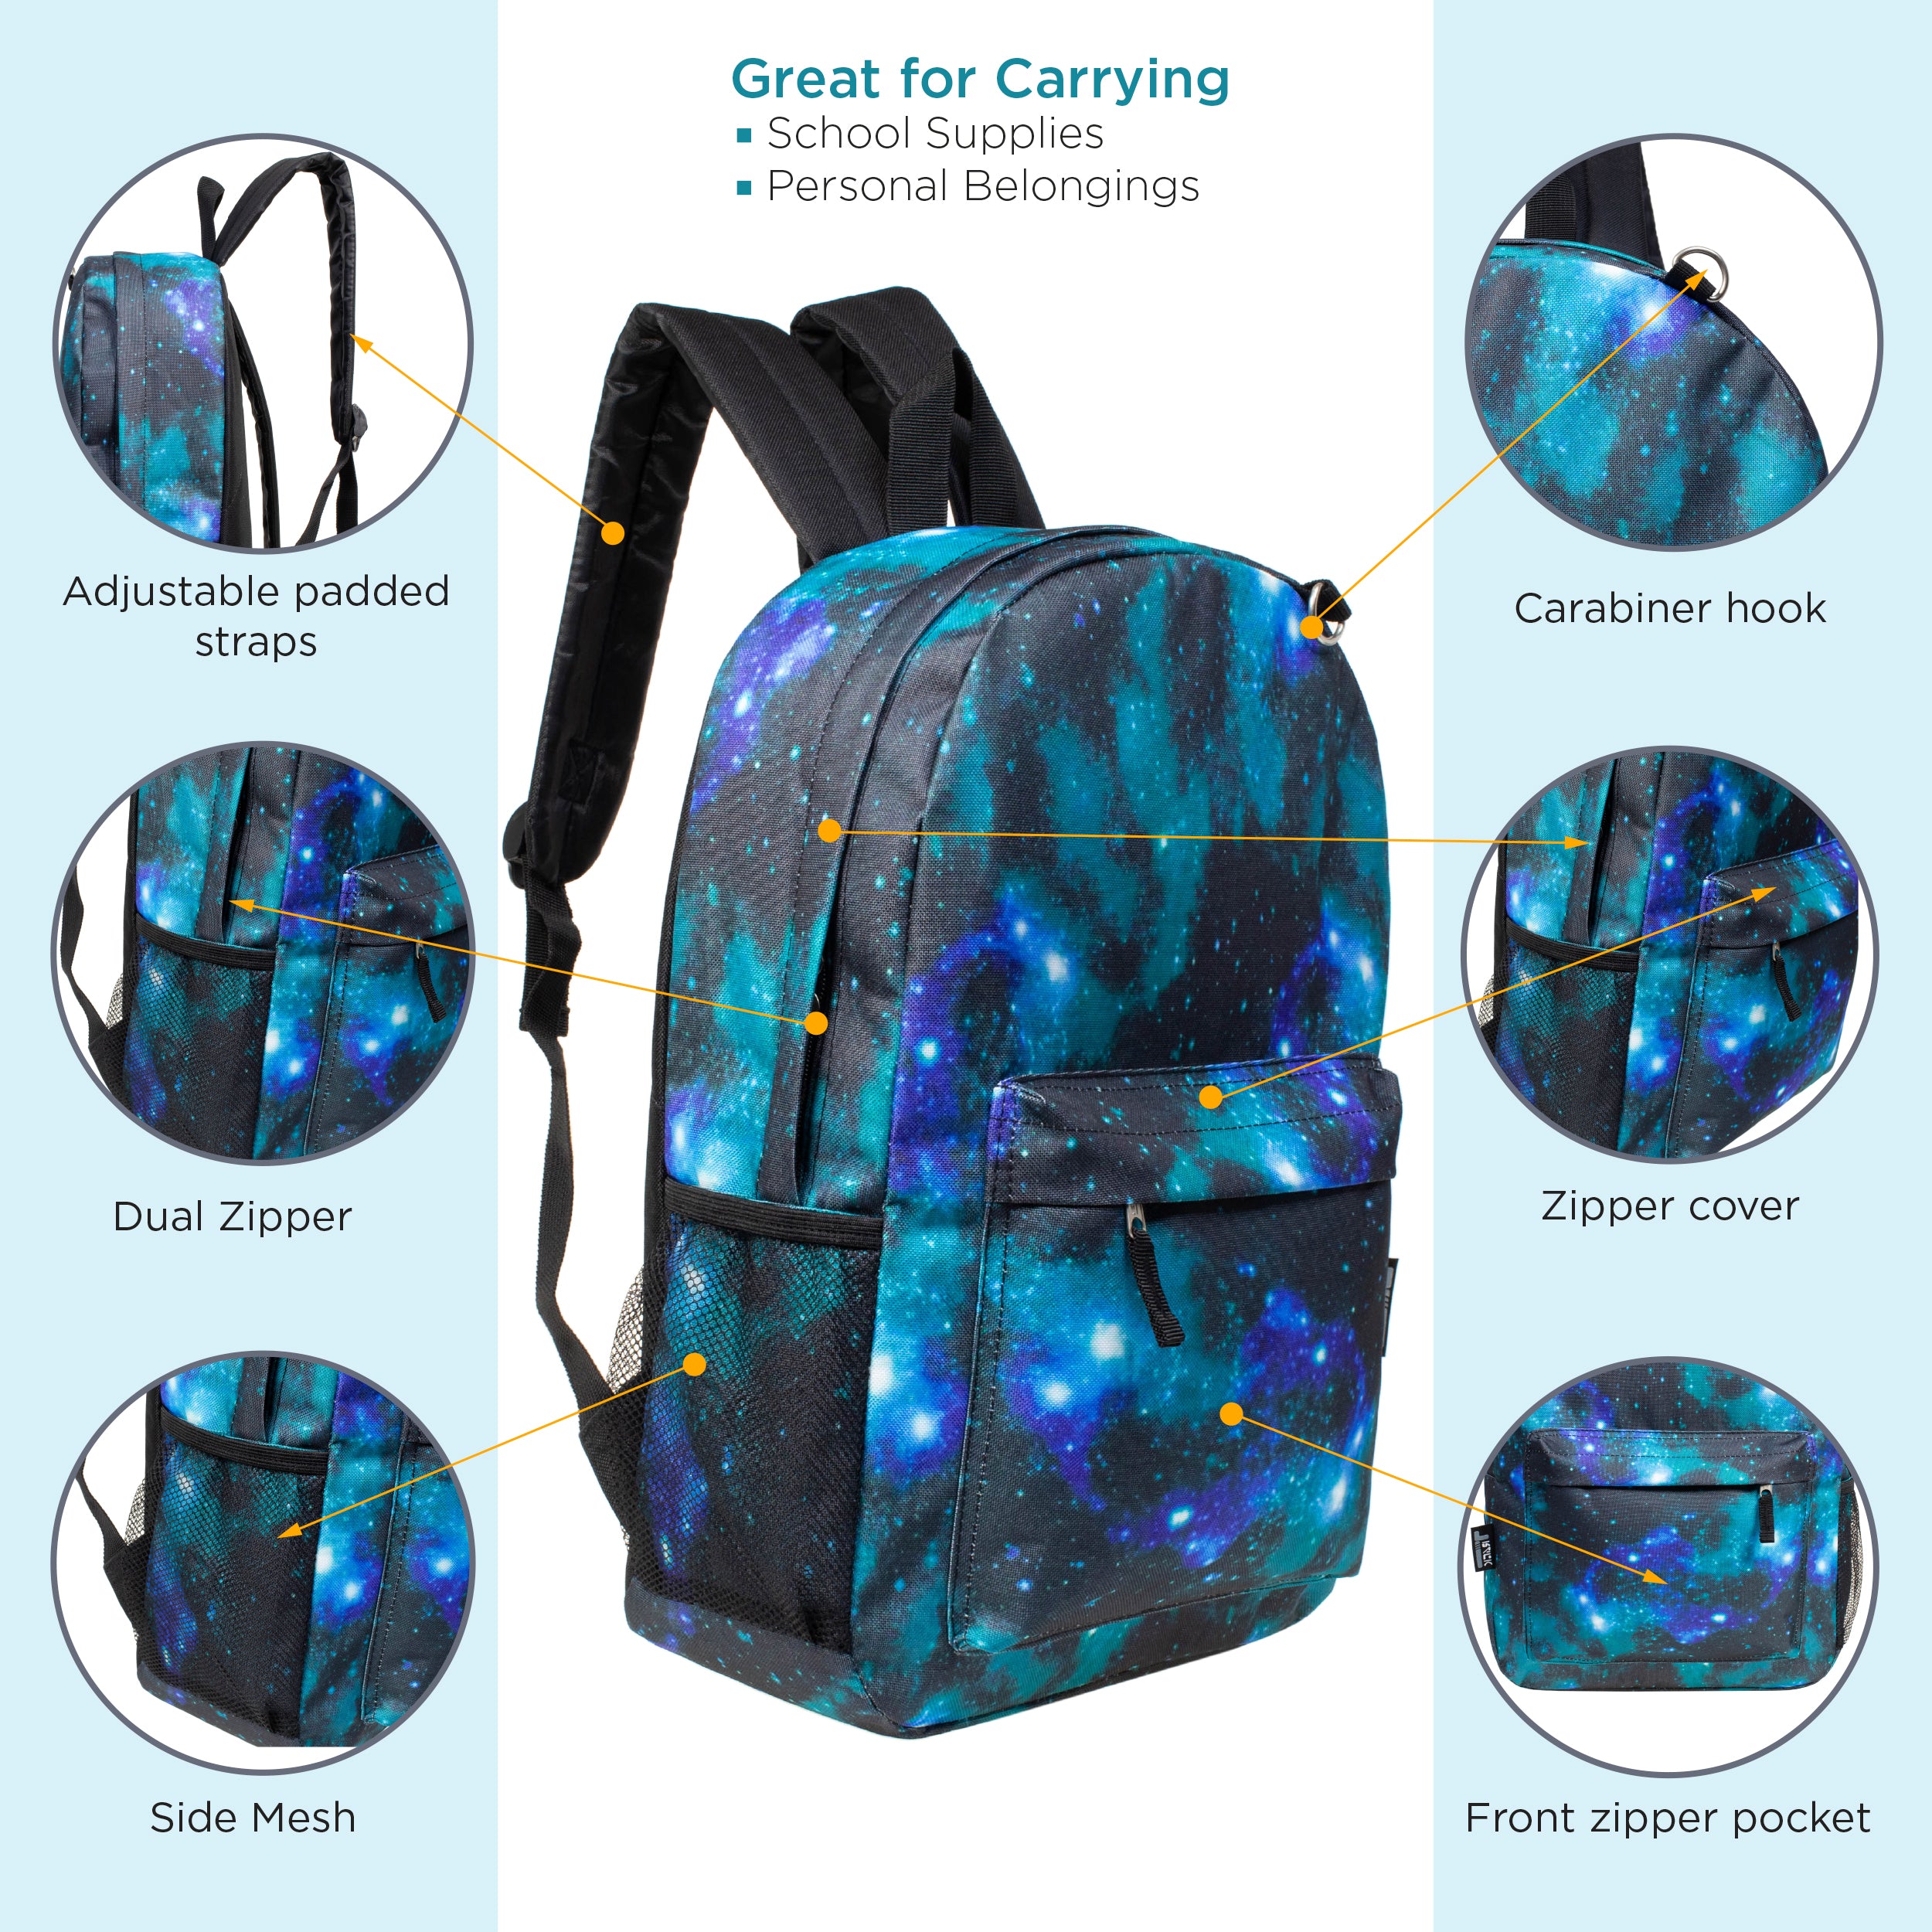 17" kids Wholesale Backpacks- 12 Assorted Colors, Wholesale Case of 24 Bookbags